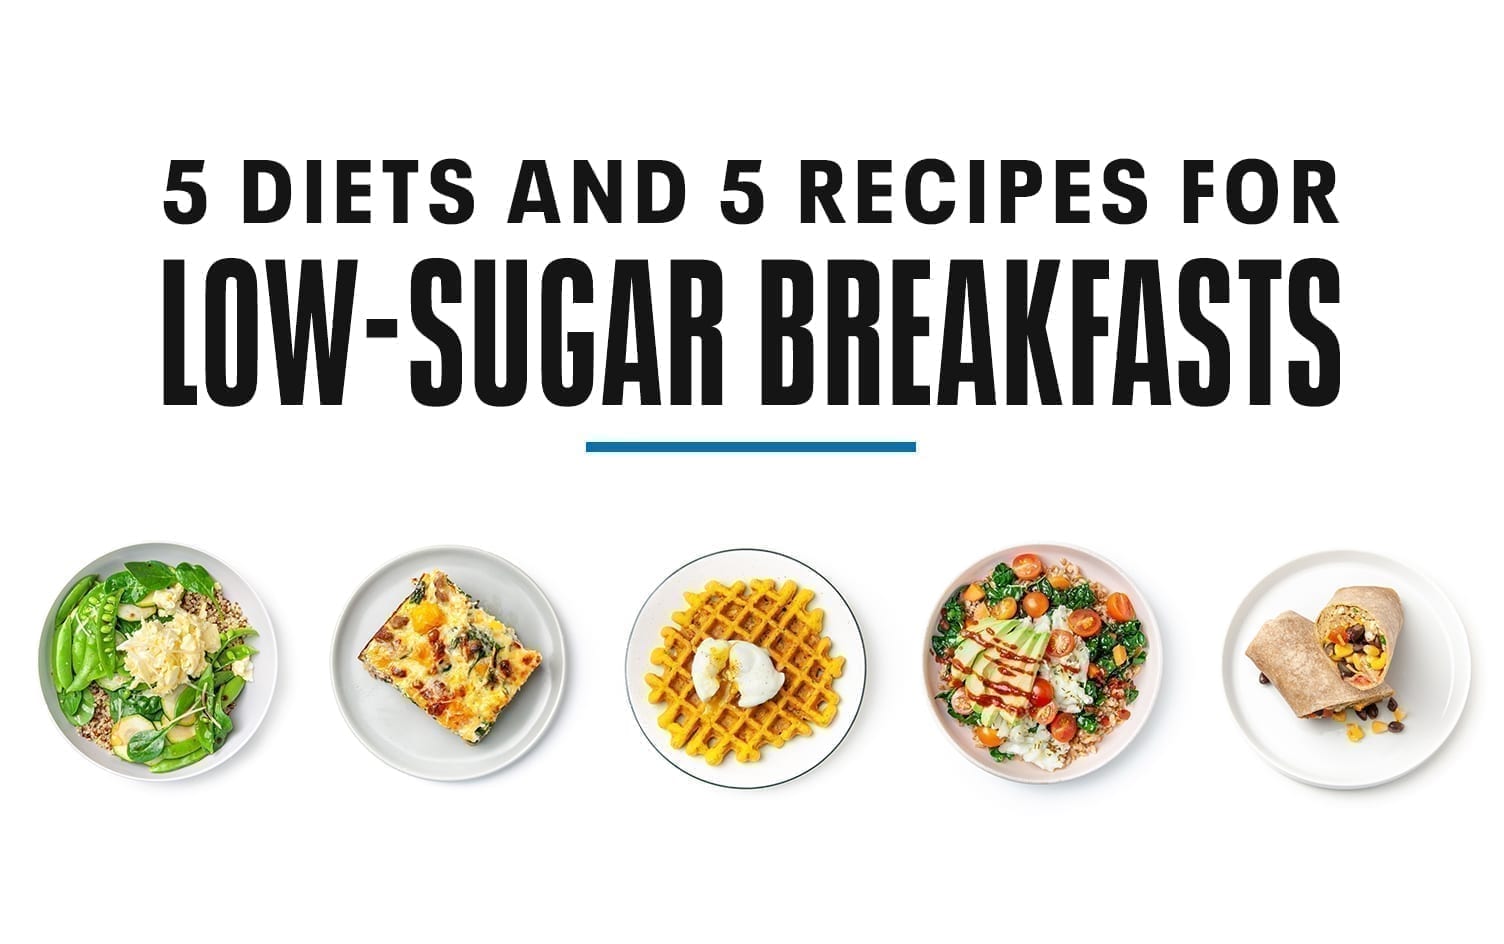 5 Diet-Friendly Recipes For Low-Sugar Breakfasts